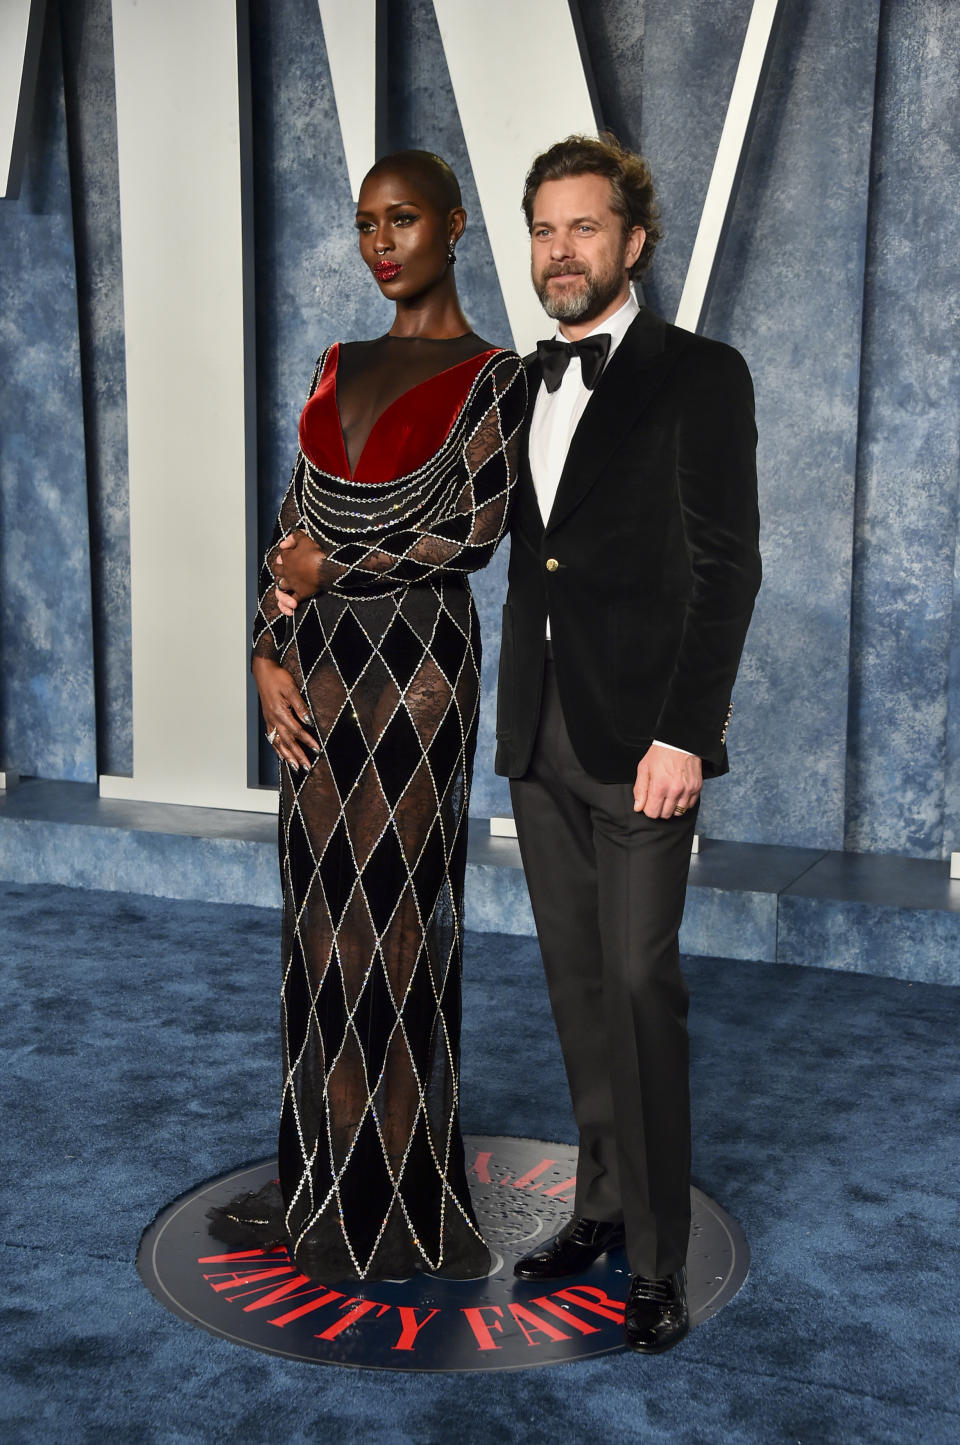 Jodie Turner-Smith and Joshua Jackson at the 2023 Vanity Fair Oscar Party held at the Wallis Annenberg Center for the Performing Arts on March 12, 2023 in Beverly Hills, California. (Photo by Alberto Rodriguez/Variety via Getty Images)